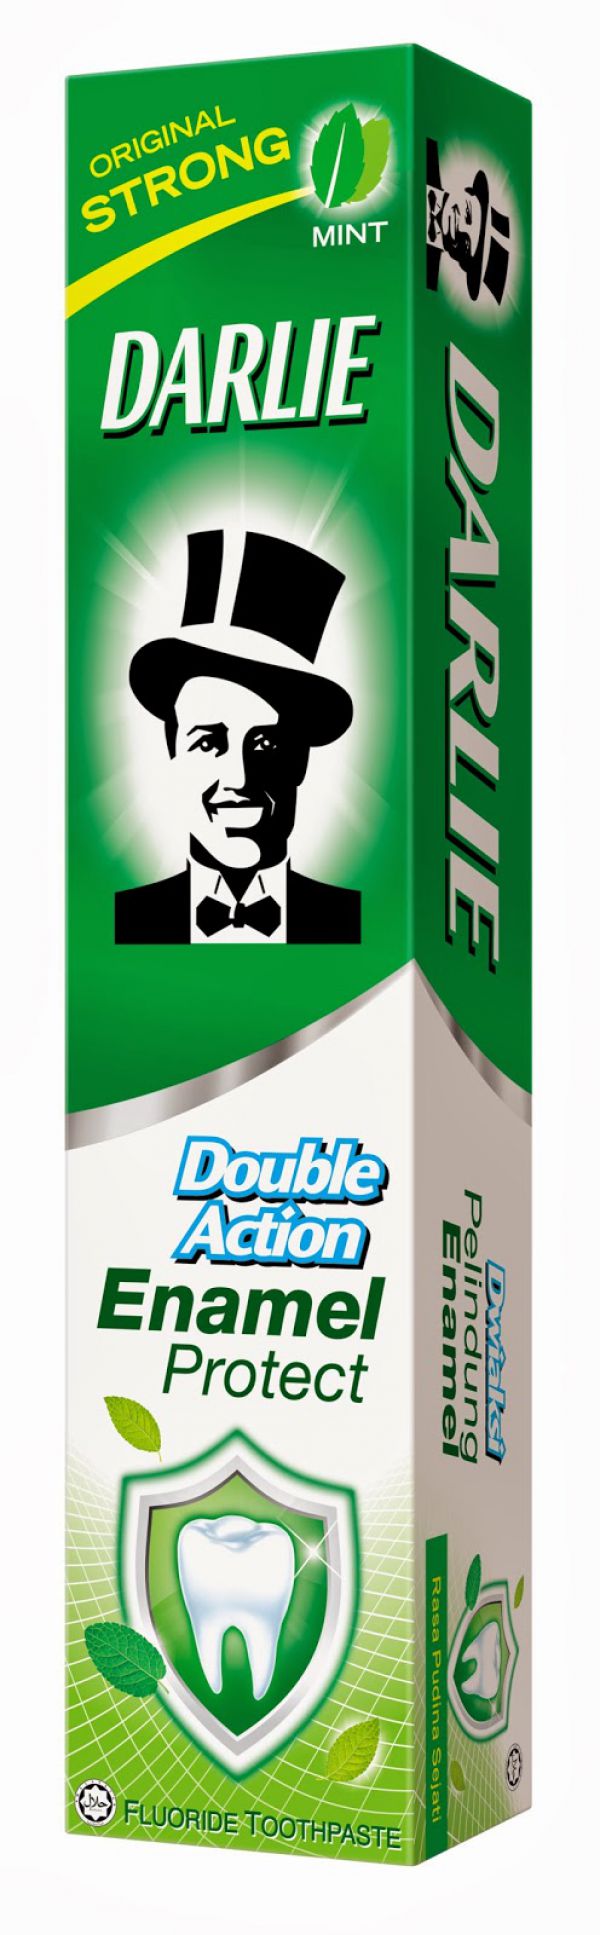 Darlie Double Action Enamel Protect Toothpaste 90г